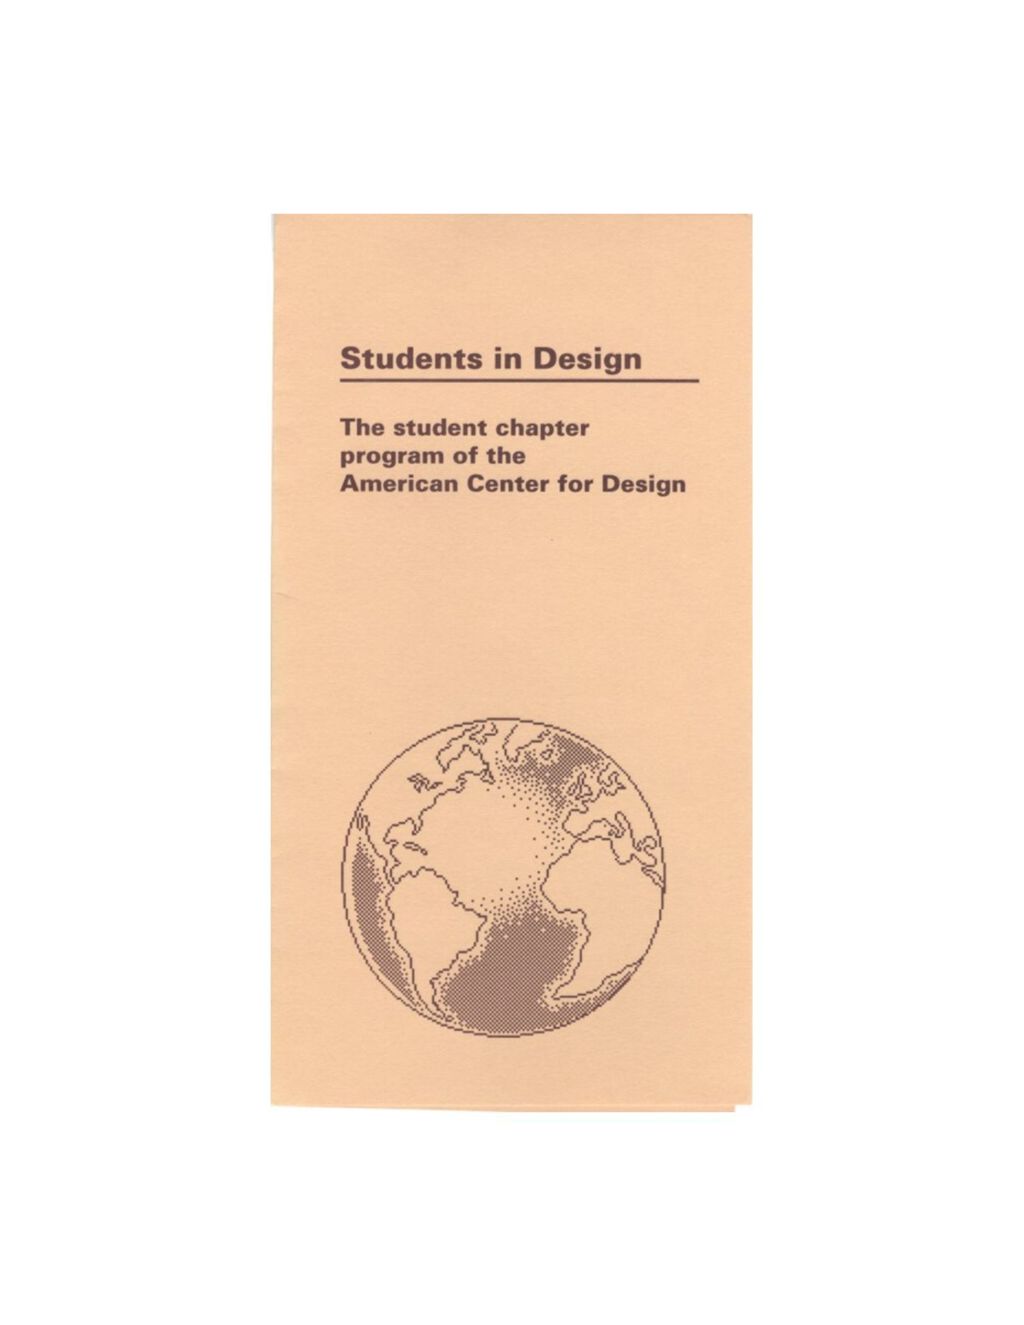 Miniature of Students in design: the student chapter program of the American Center for Design